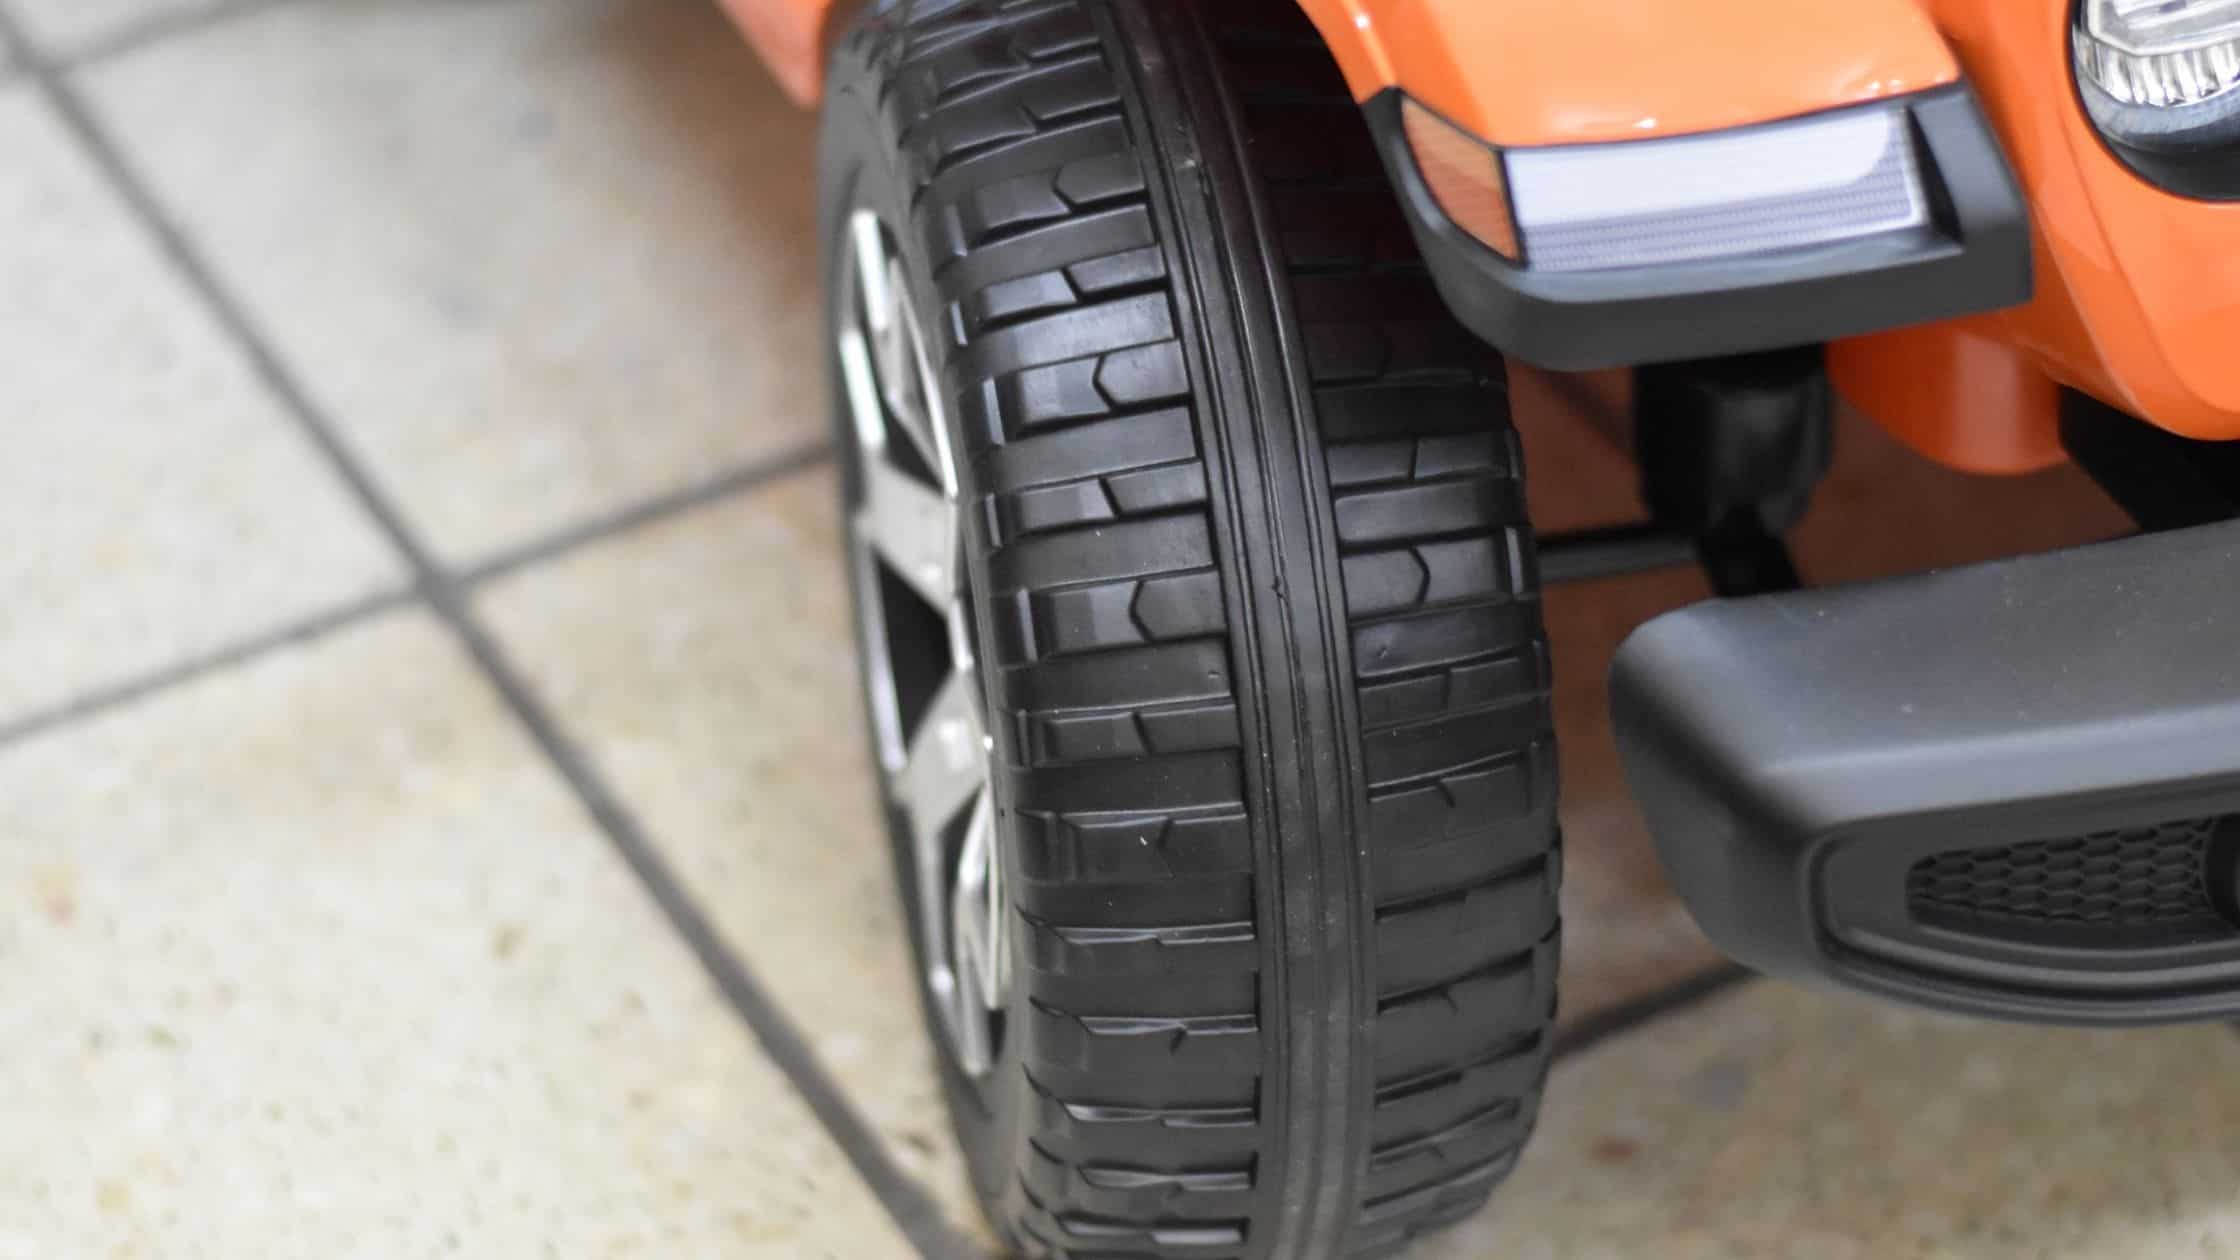 How to Replace Tires on Power Wheels